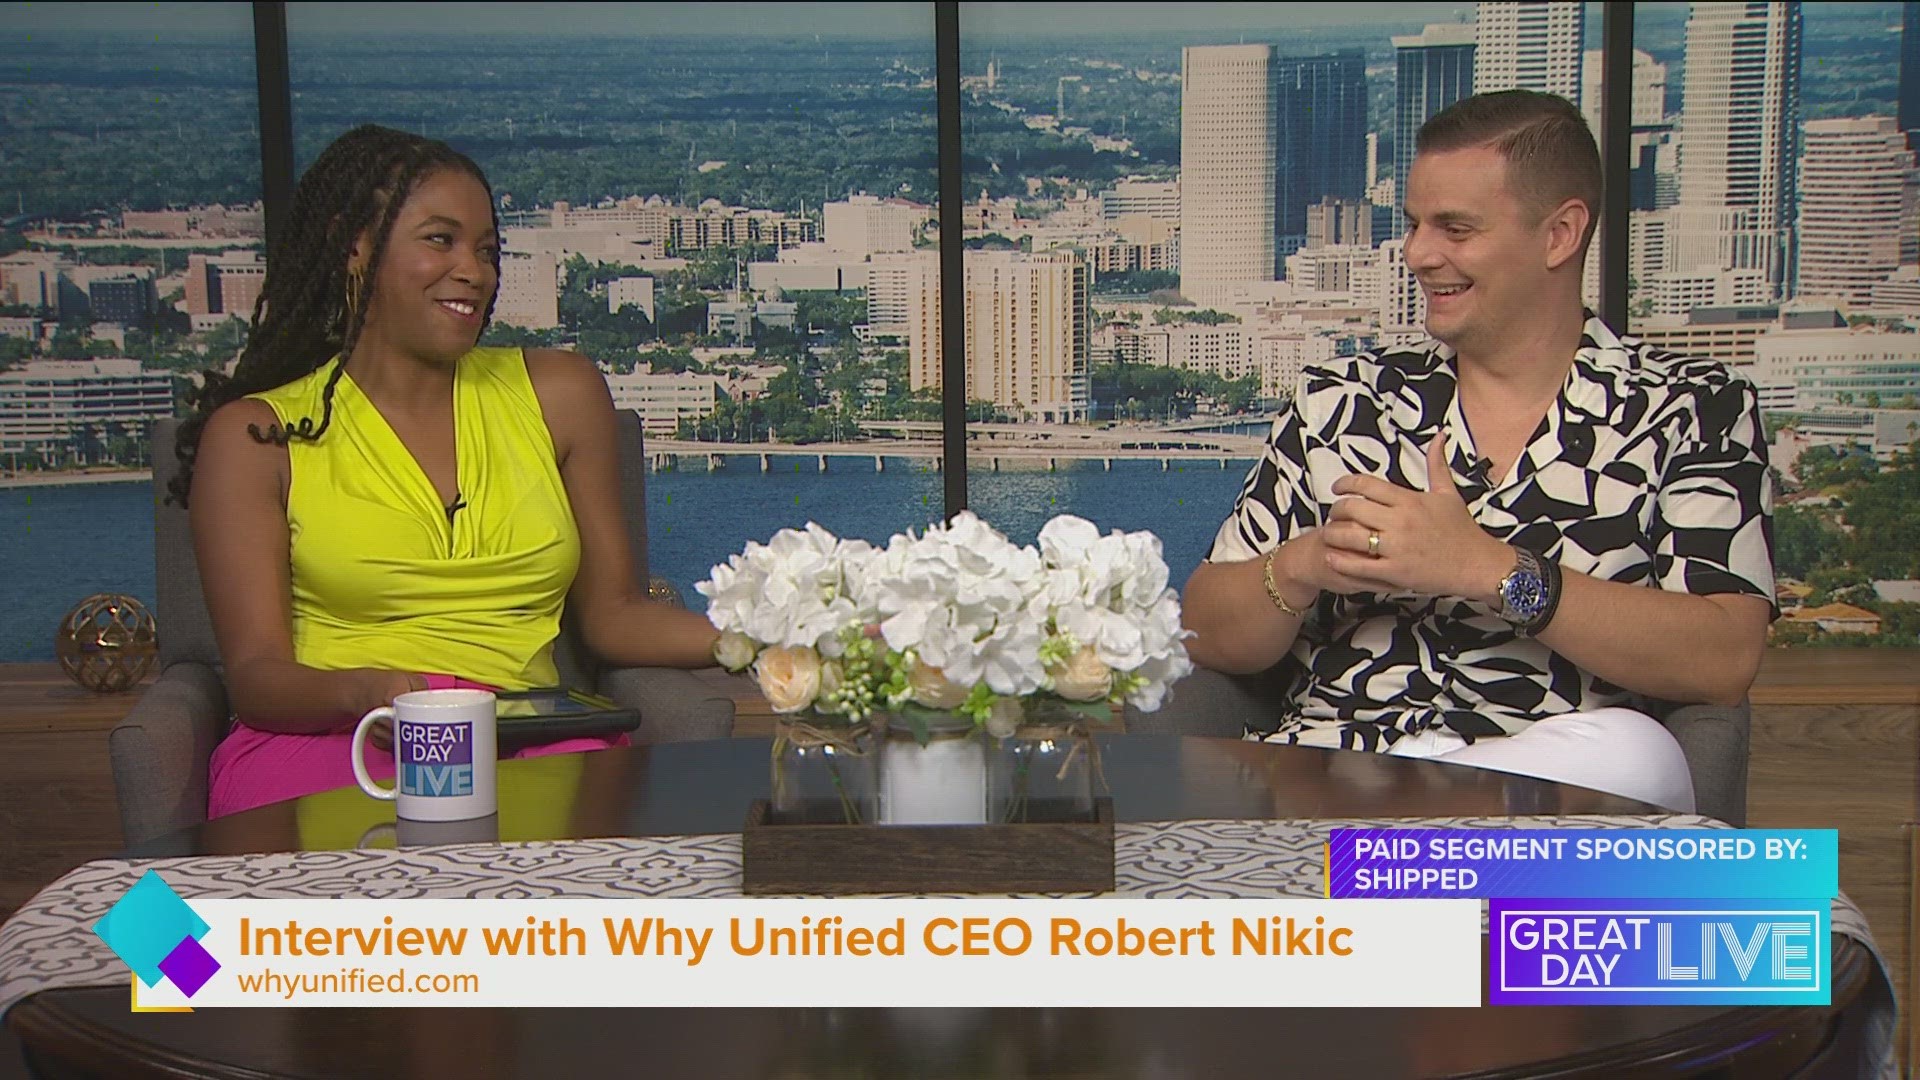 Paid segment sponsored by: SHIPPED. We talk to CEO Robert Nikic of Why Unified, named one of the fastest-growing companies in the country by Inc. Magazine.